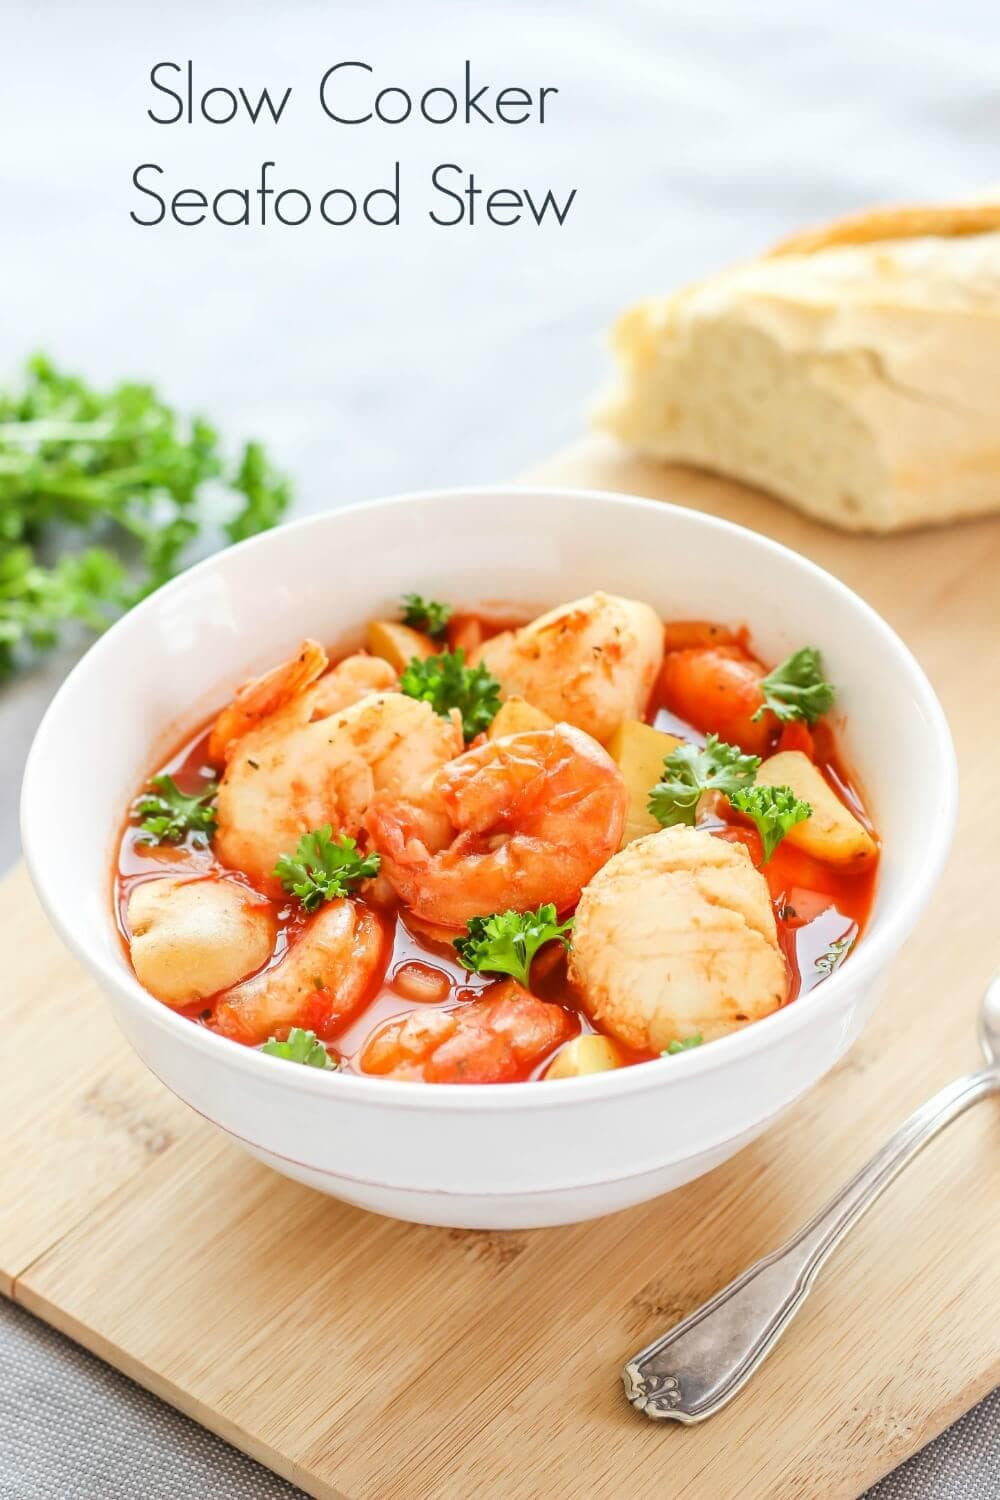 Healthy Seafood Slow Cooker Recipes
 Slow Cooker Seafood Stew I Heart Nap Time